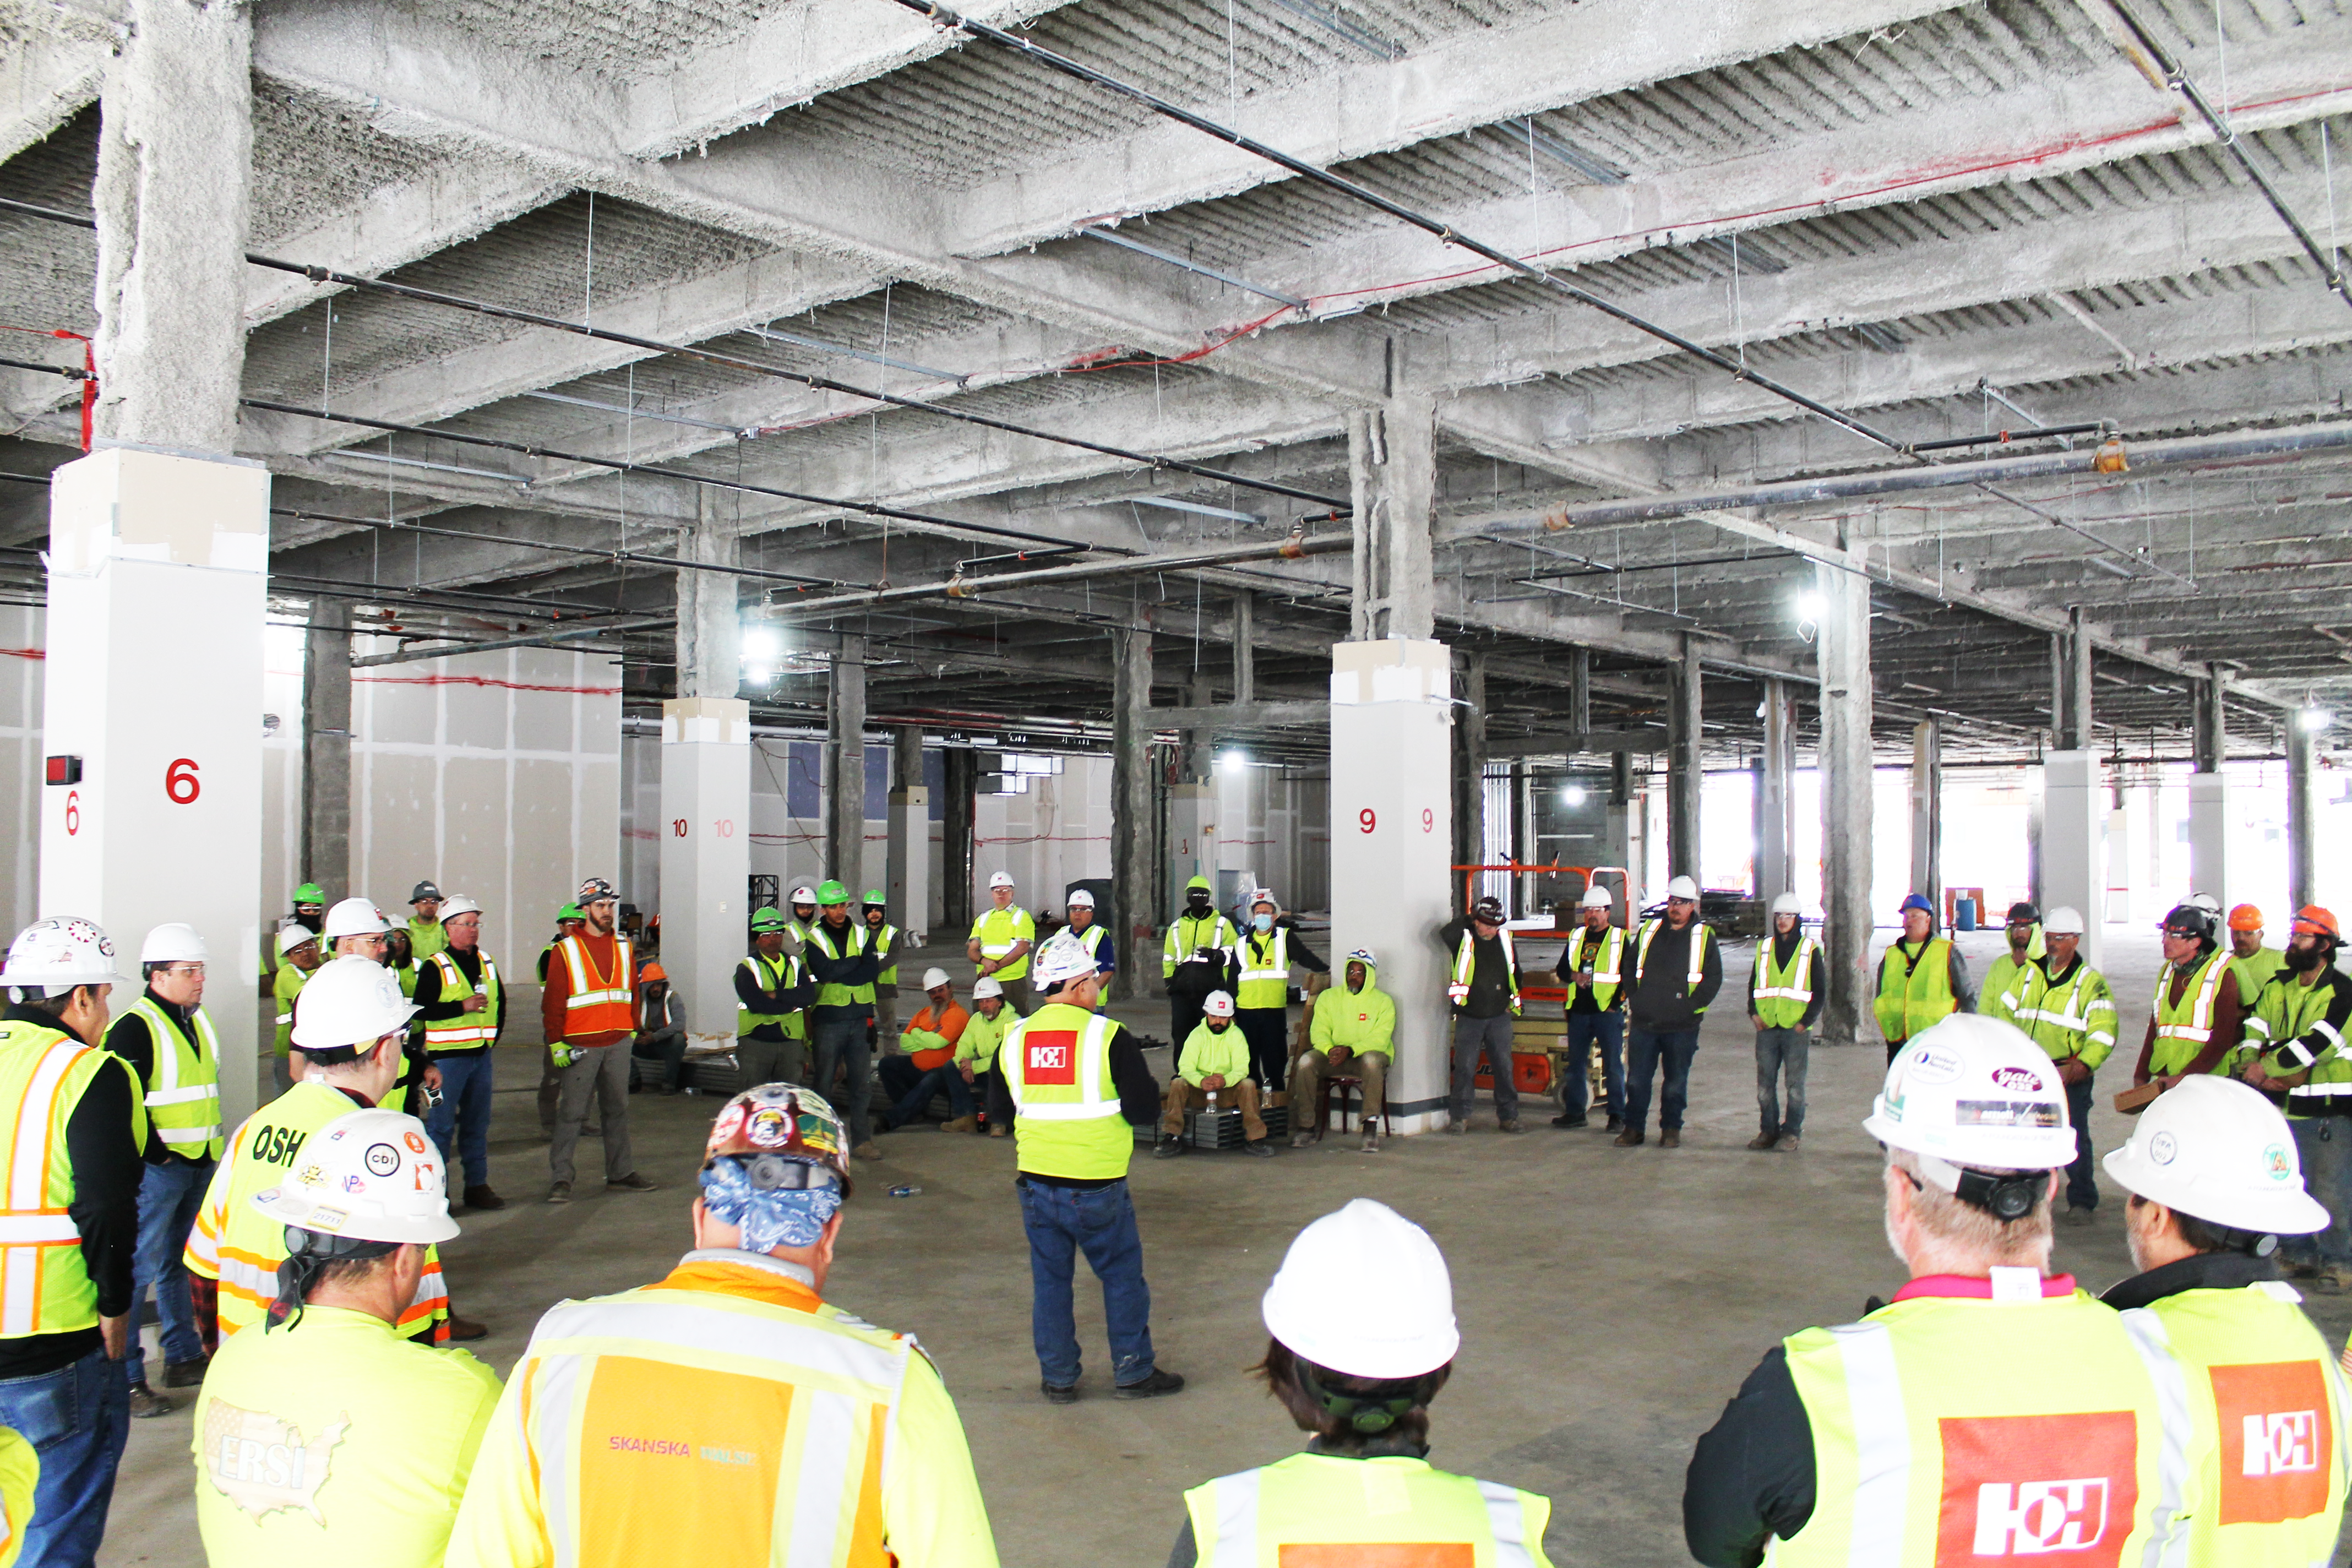 The Hayner Hoyt Corporation and OSHA host a “Safety Stand-Down” at the City Center Construction project